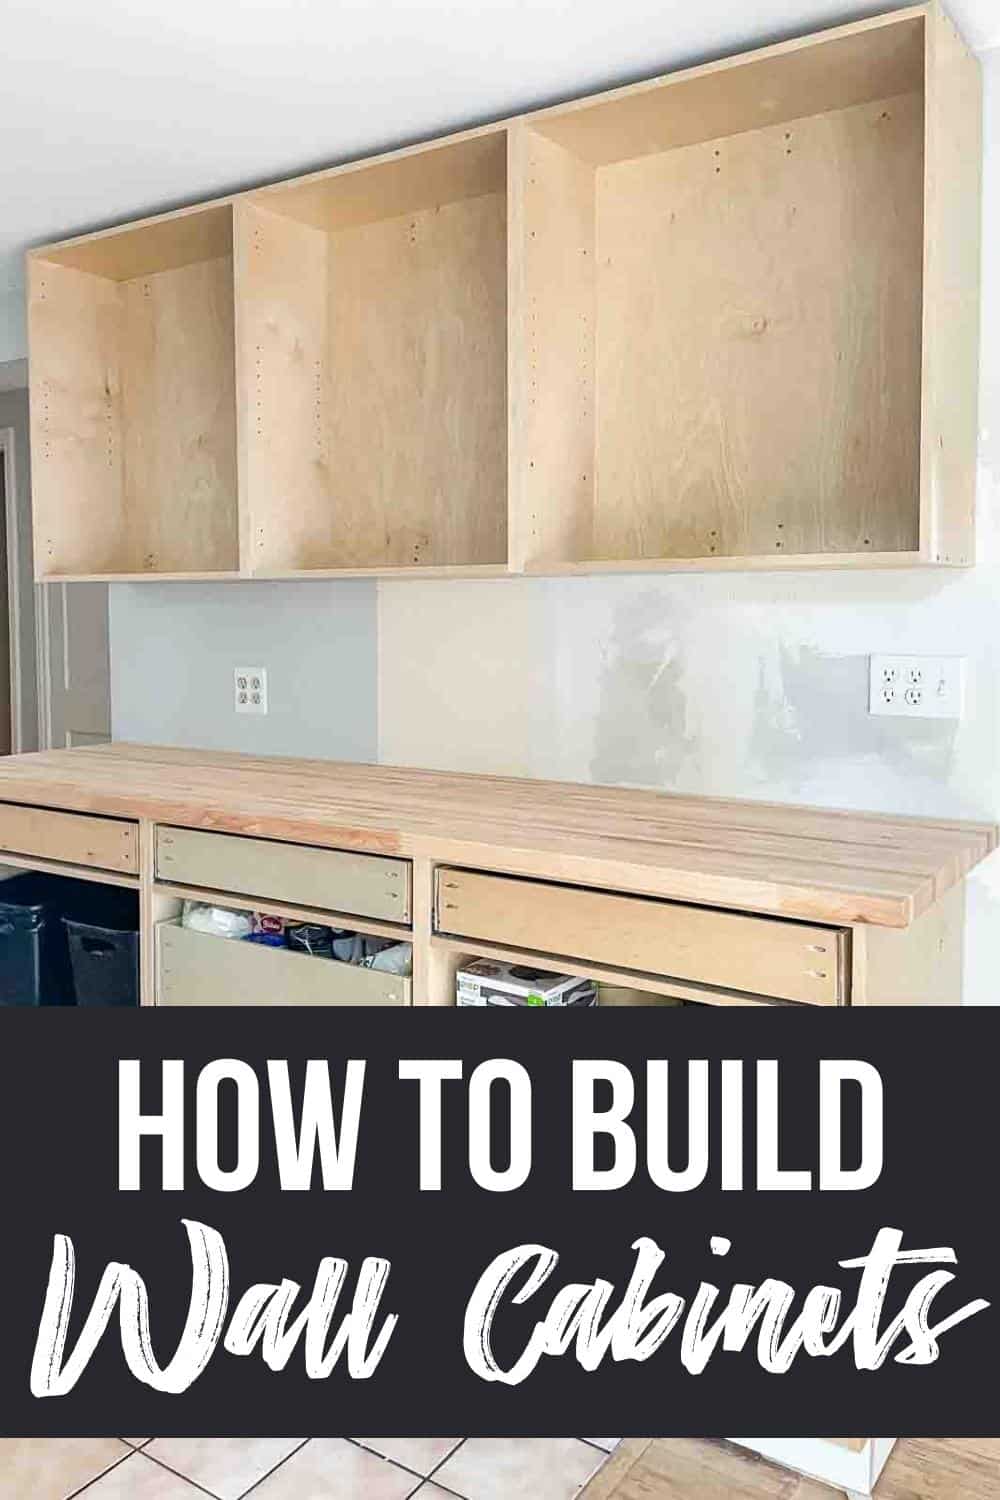 How to Build a DIY Wall Cabinet - The Handyman